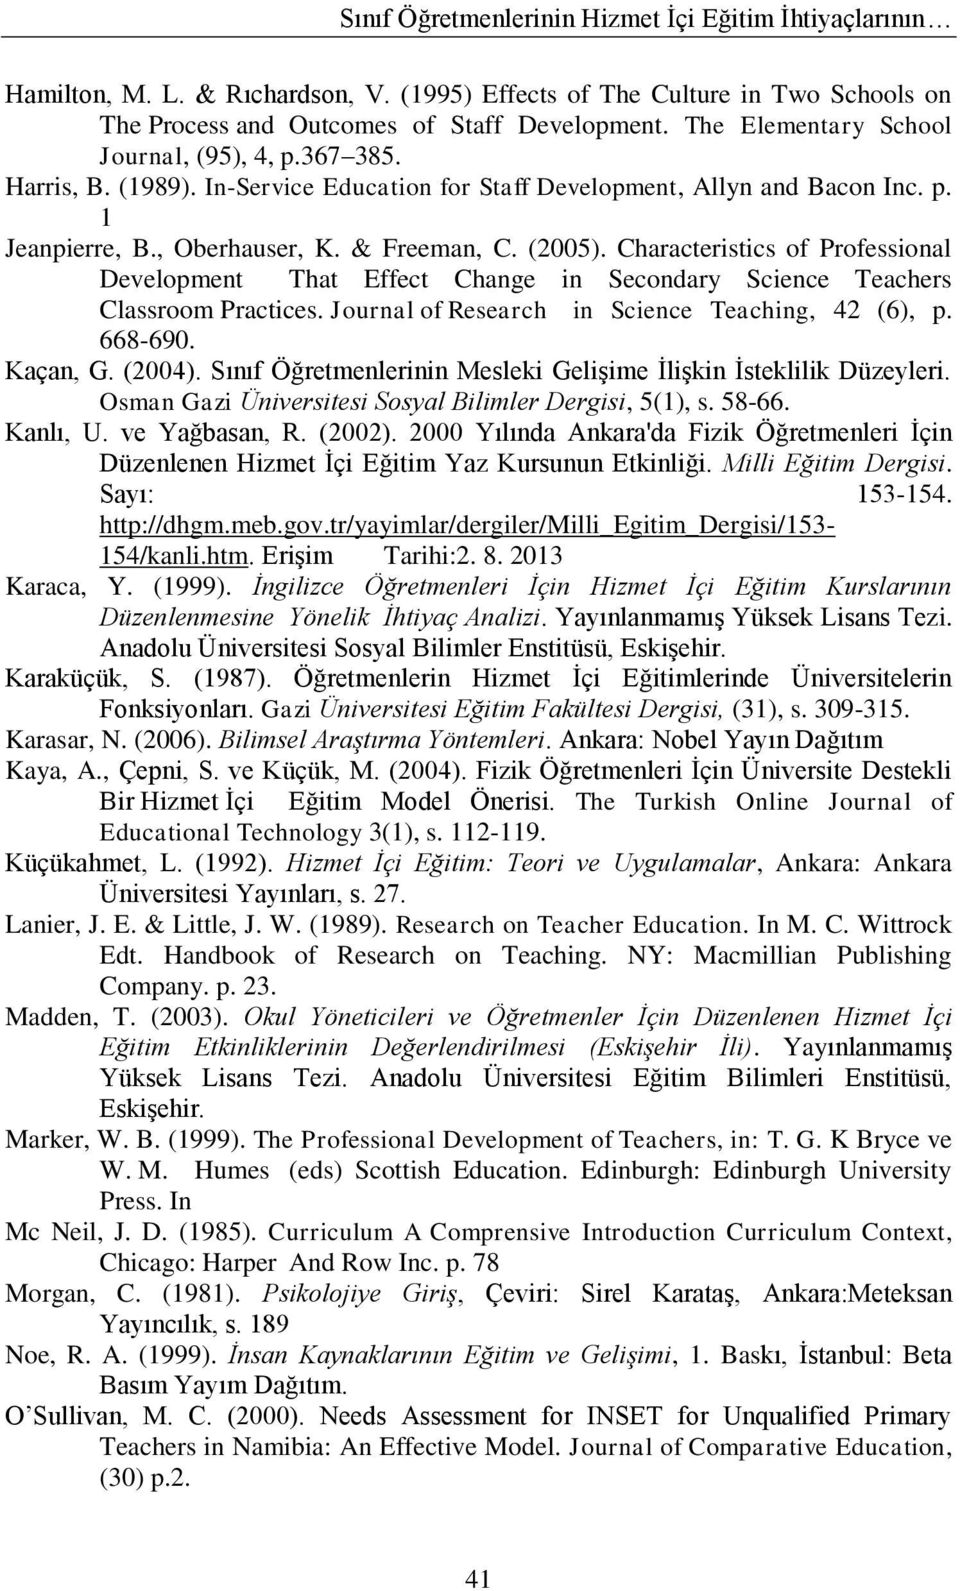 Characteristics of Professional Development That Effect Change in Secondary Science Teachers Classroom Practices. Journal of Research in Science Teaching, 42 (6), p. 668-690. Kaçan, G. (2004).